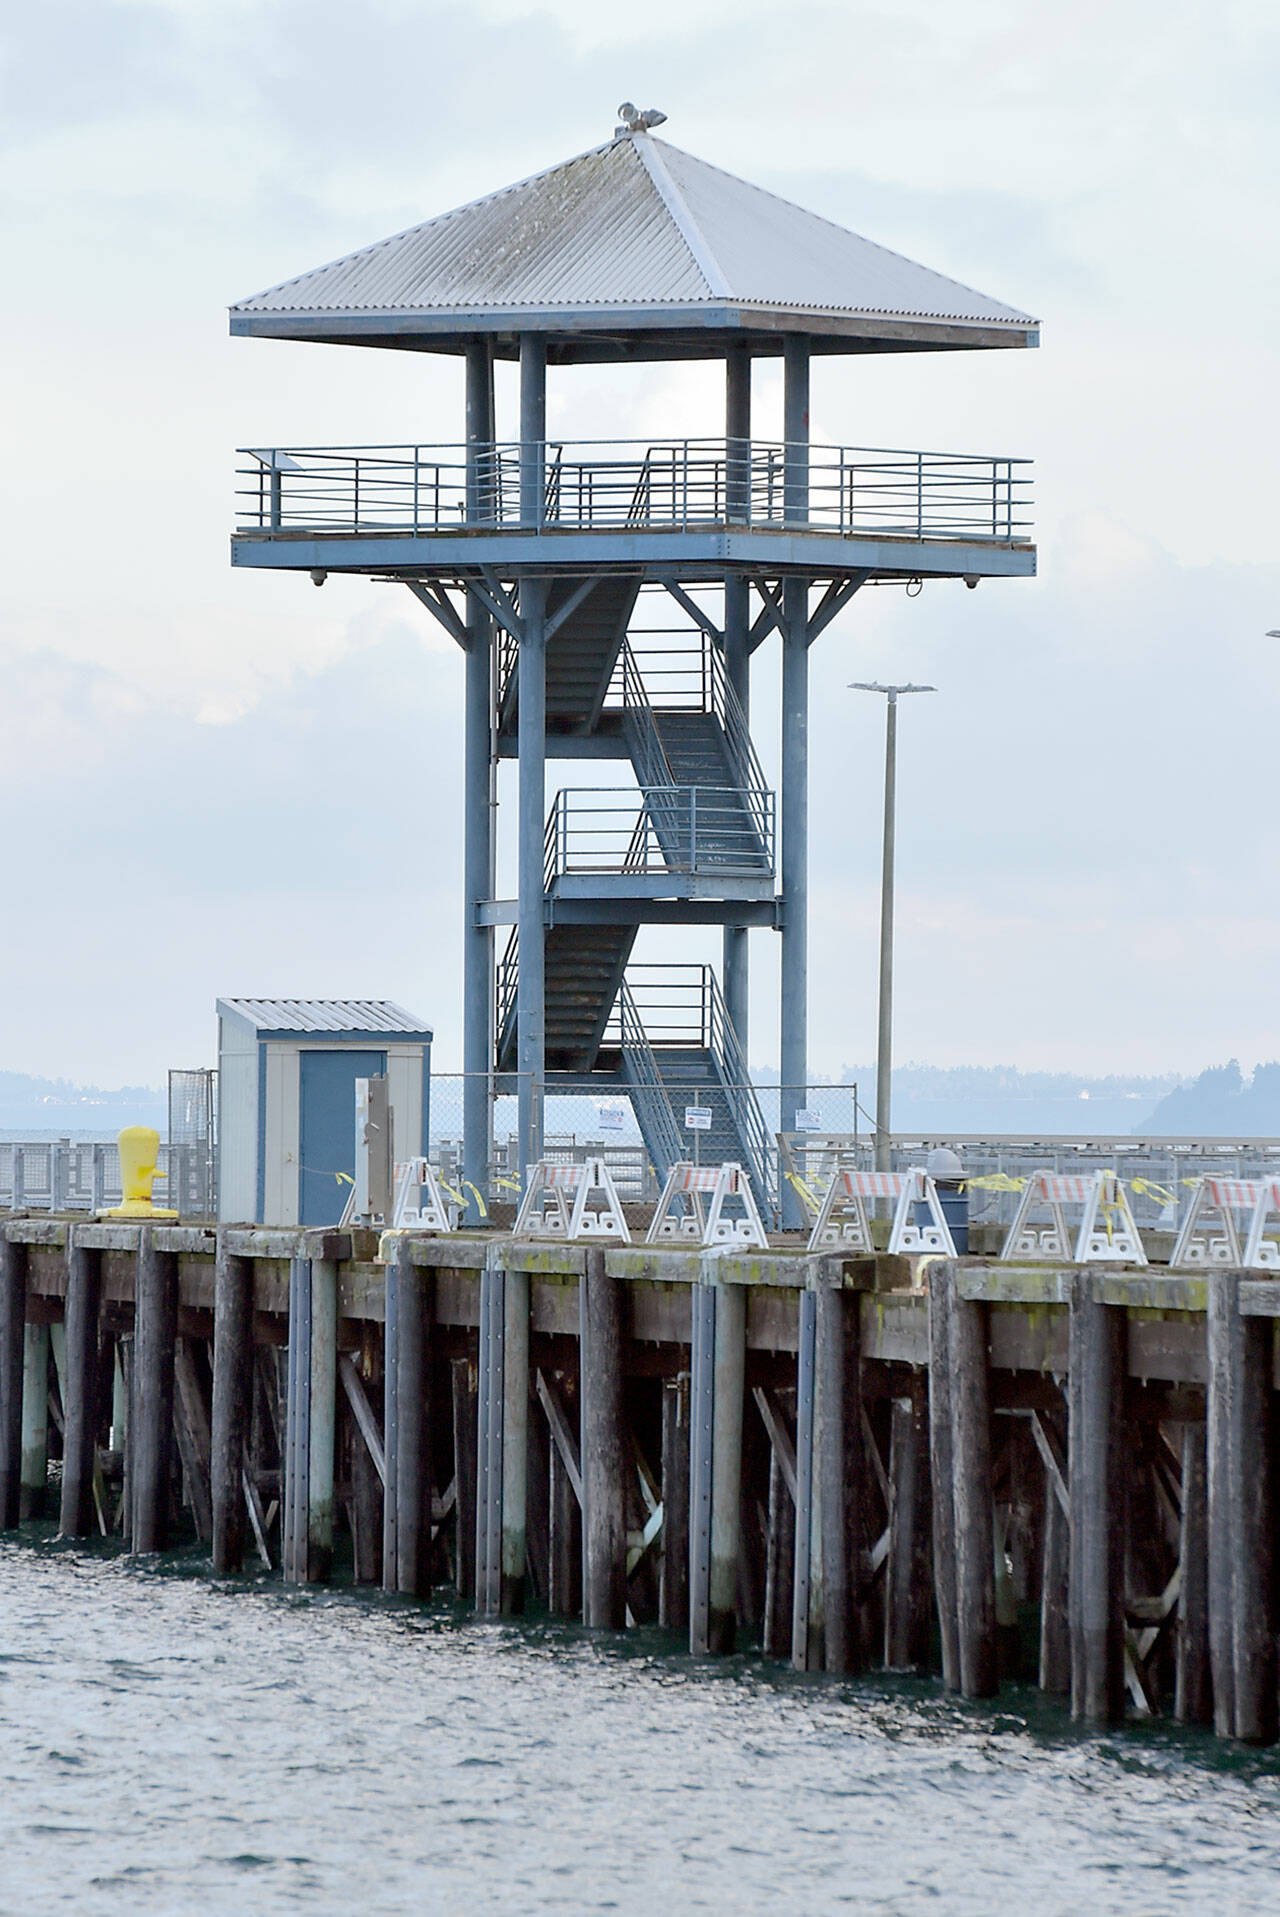 Repairs to the observation tower at Port Angeles City Pier, shown Wednesday, could begin as early as this month using lodging tax funds. (Keith Thorpe/Peninsula Daily News)